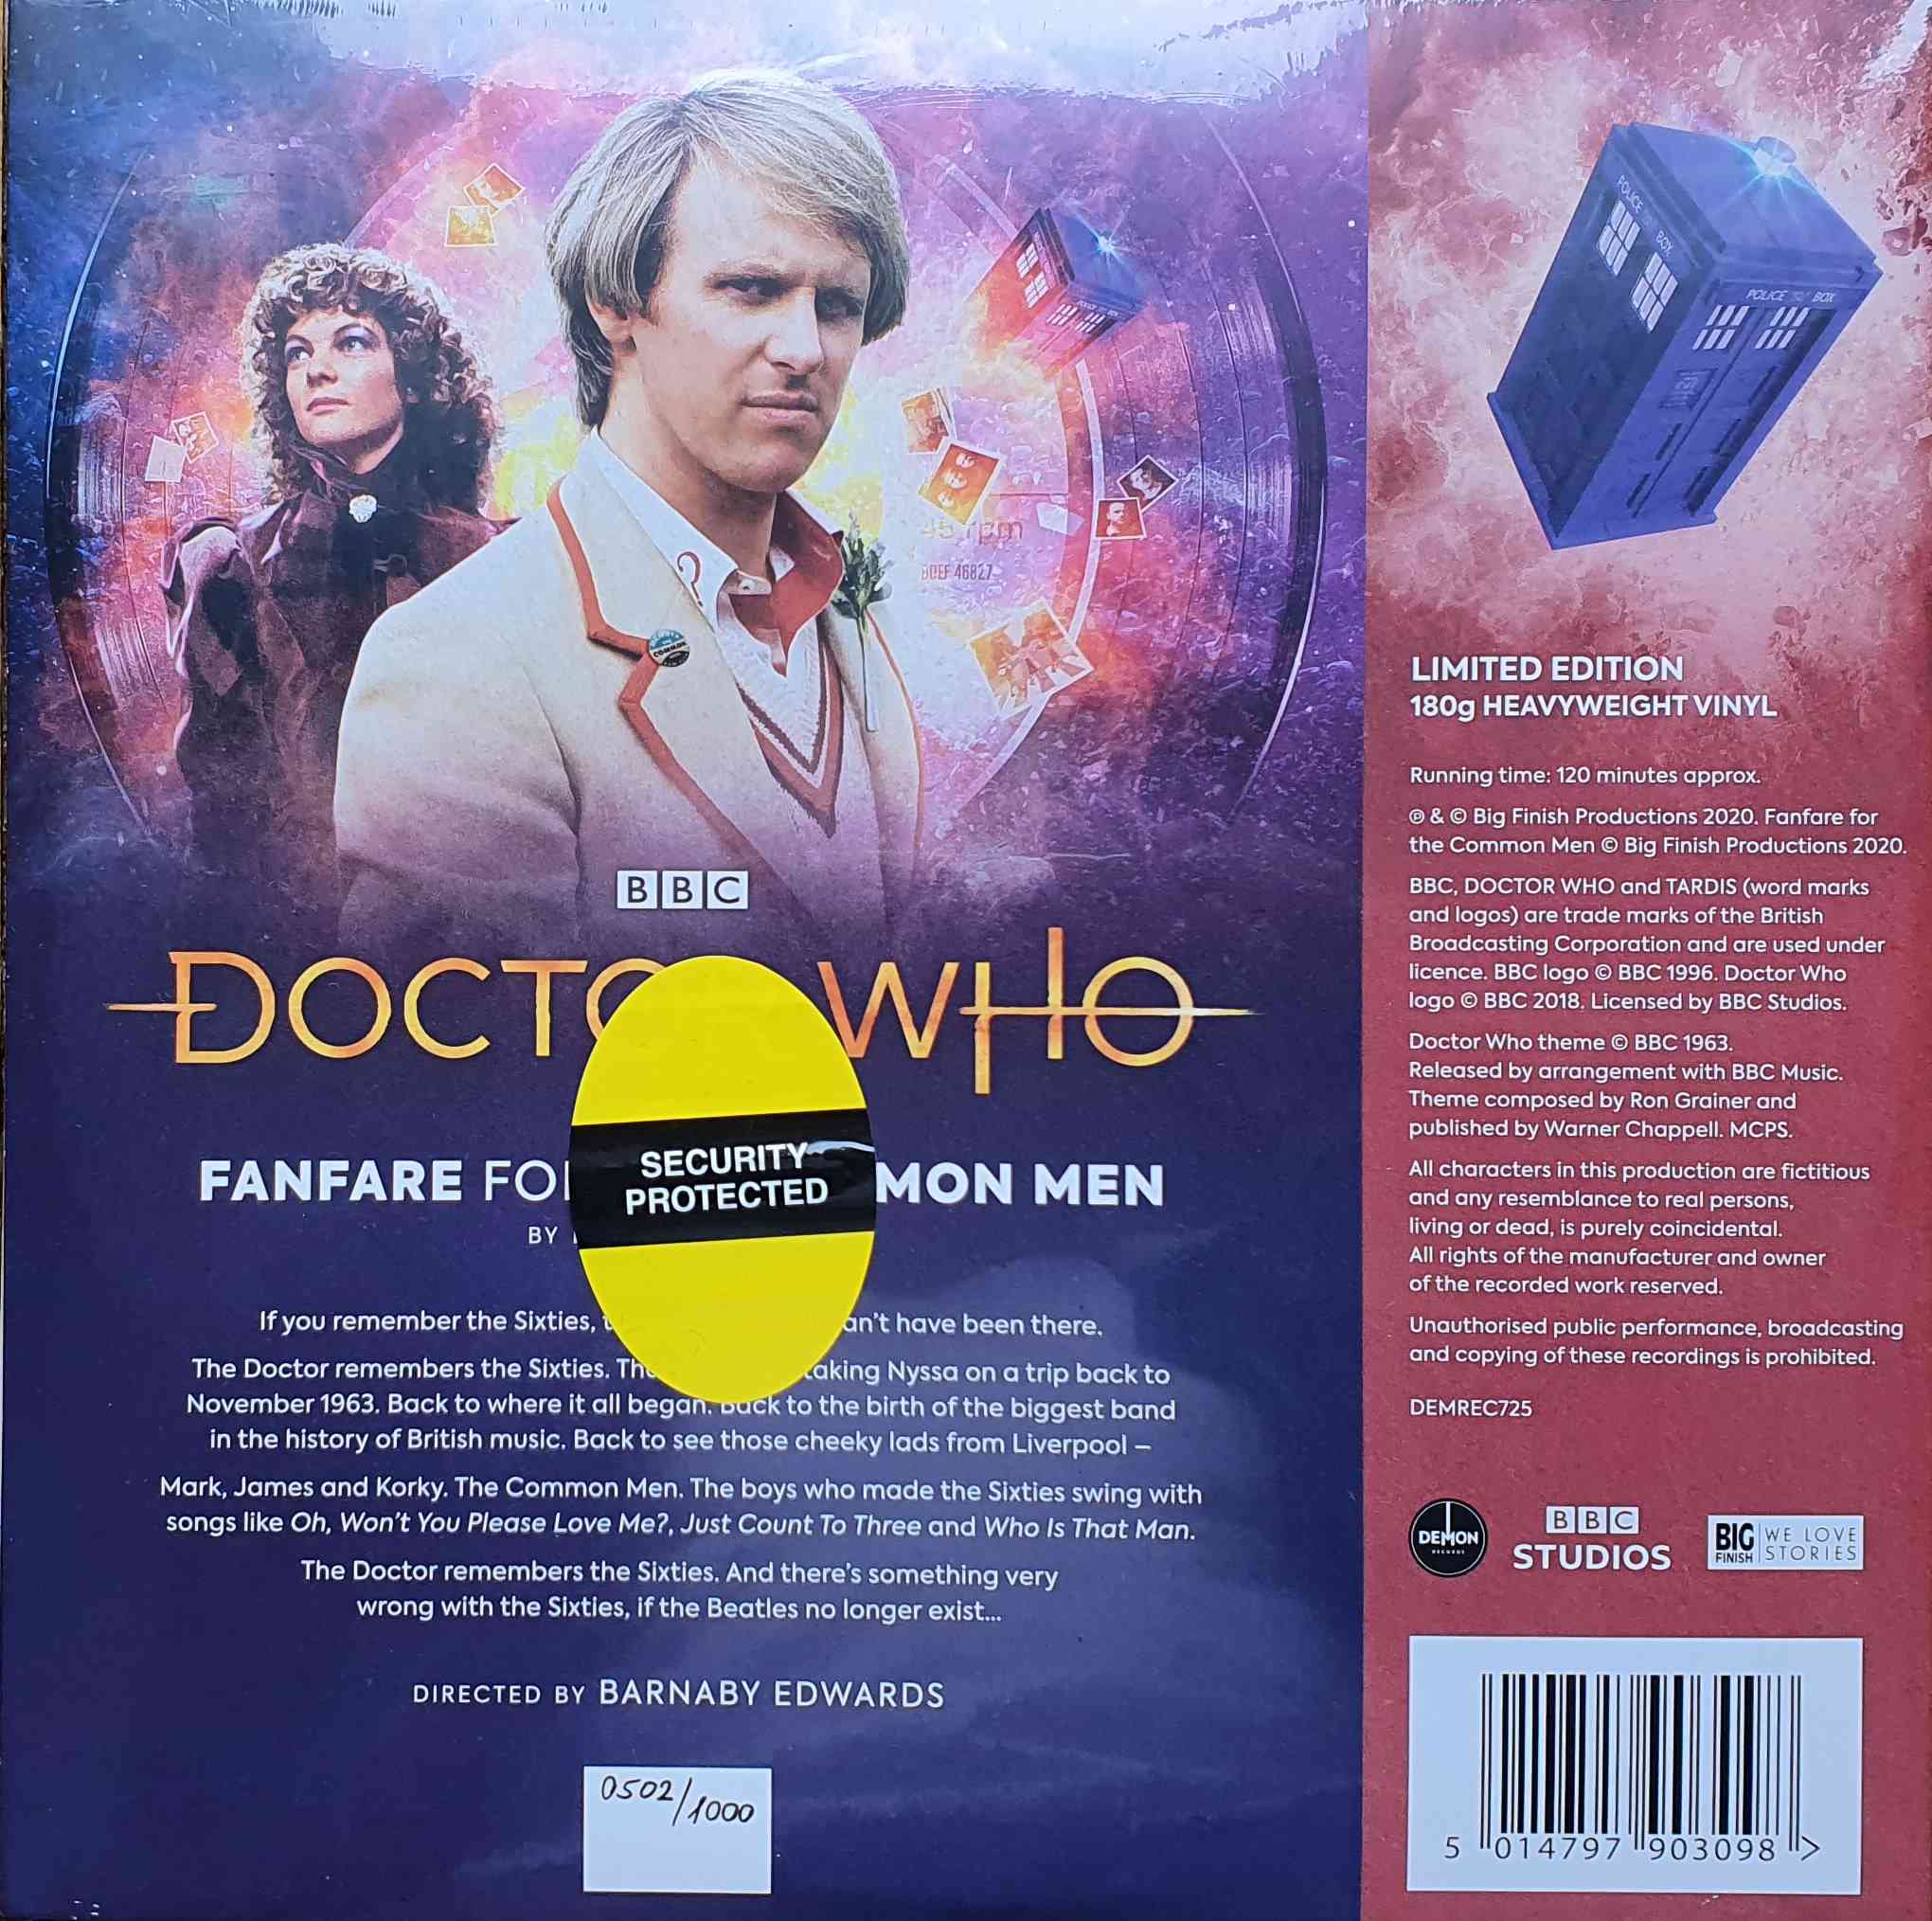 Picture of DEMREC 725 Doctor Who - Fanfare for the common man by artist Eddie Robson from the BBC records and Tapes library